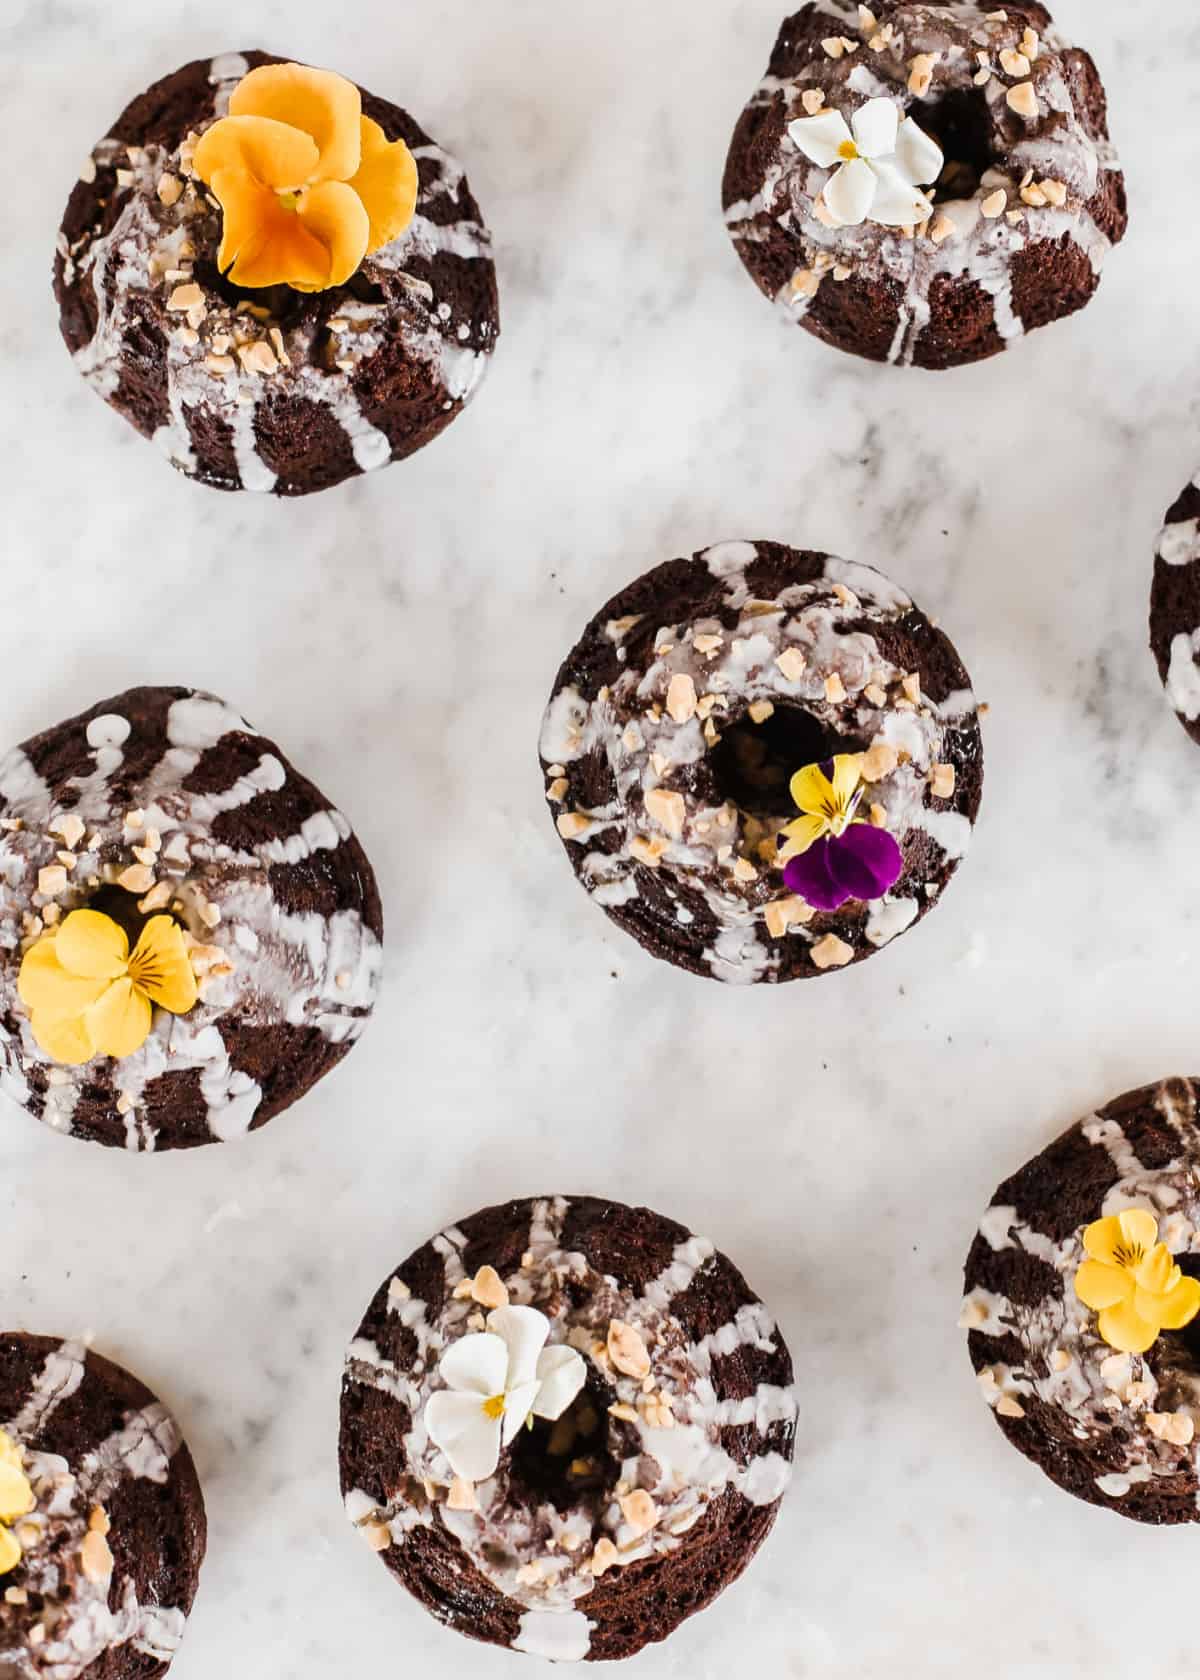 rows of mini chocolate cakes with flowers garnish, on marble table, overhead view.